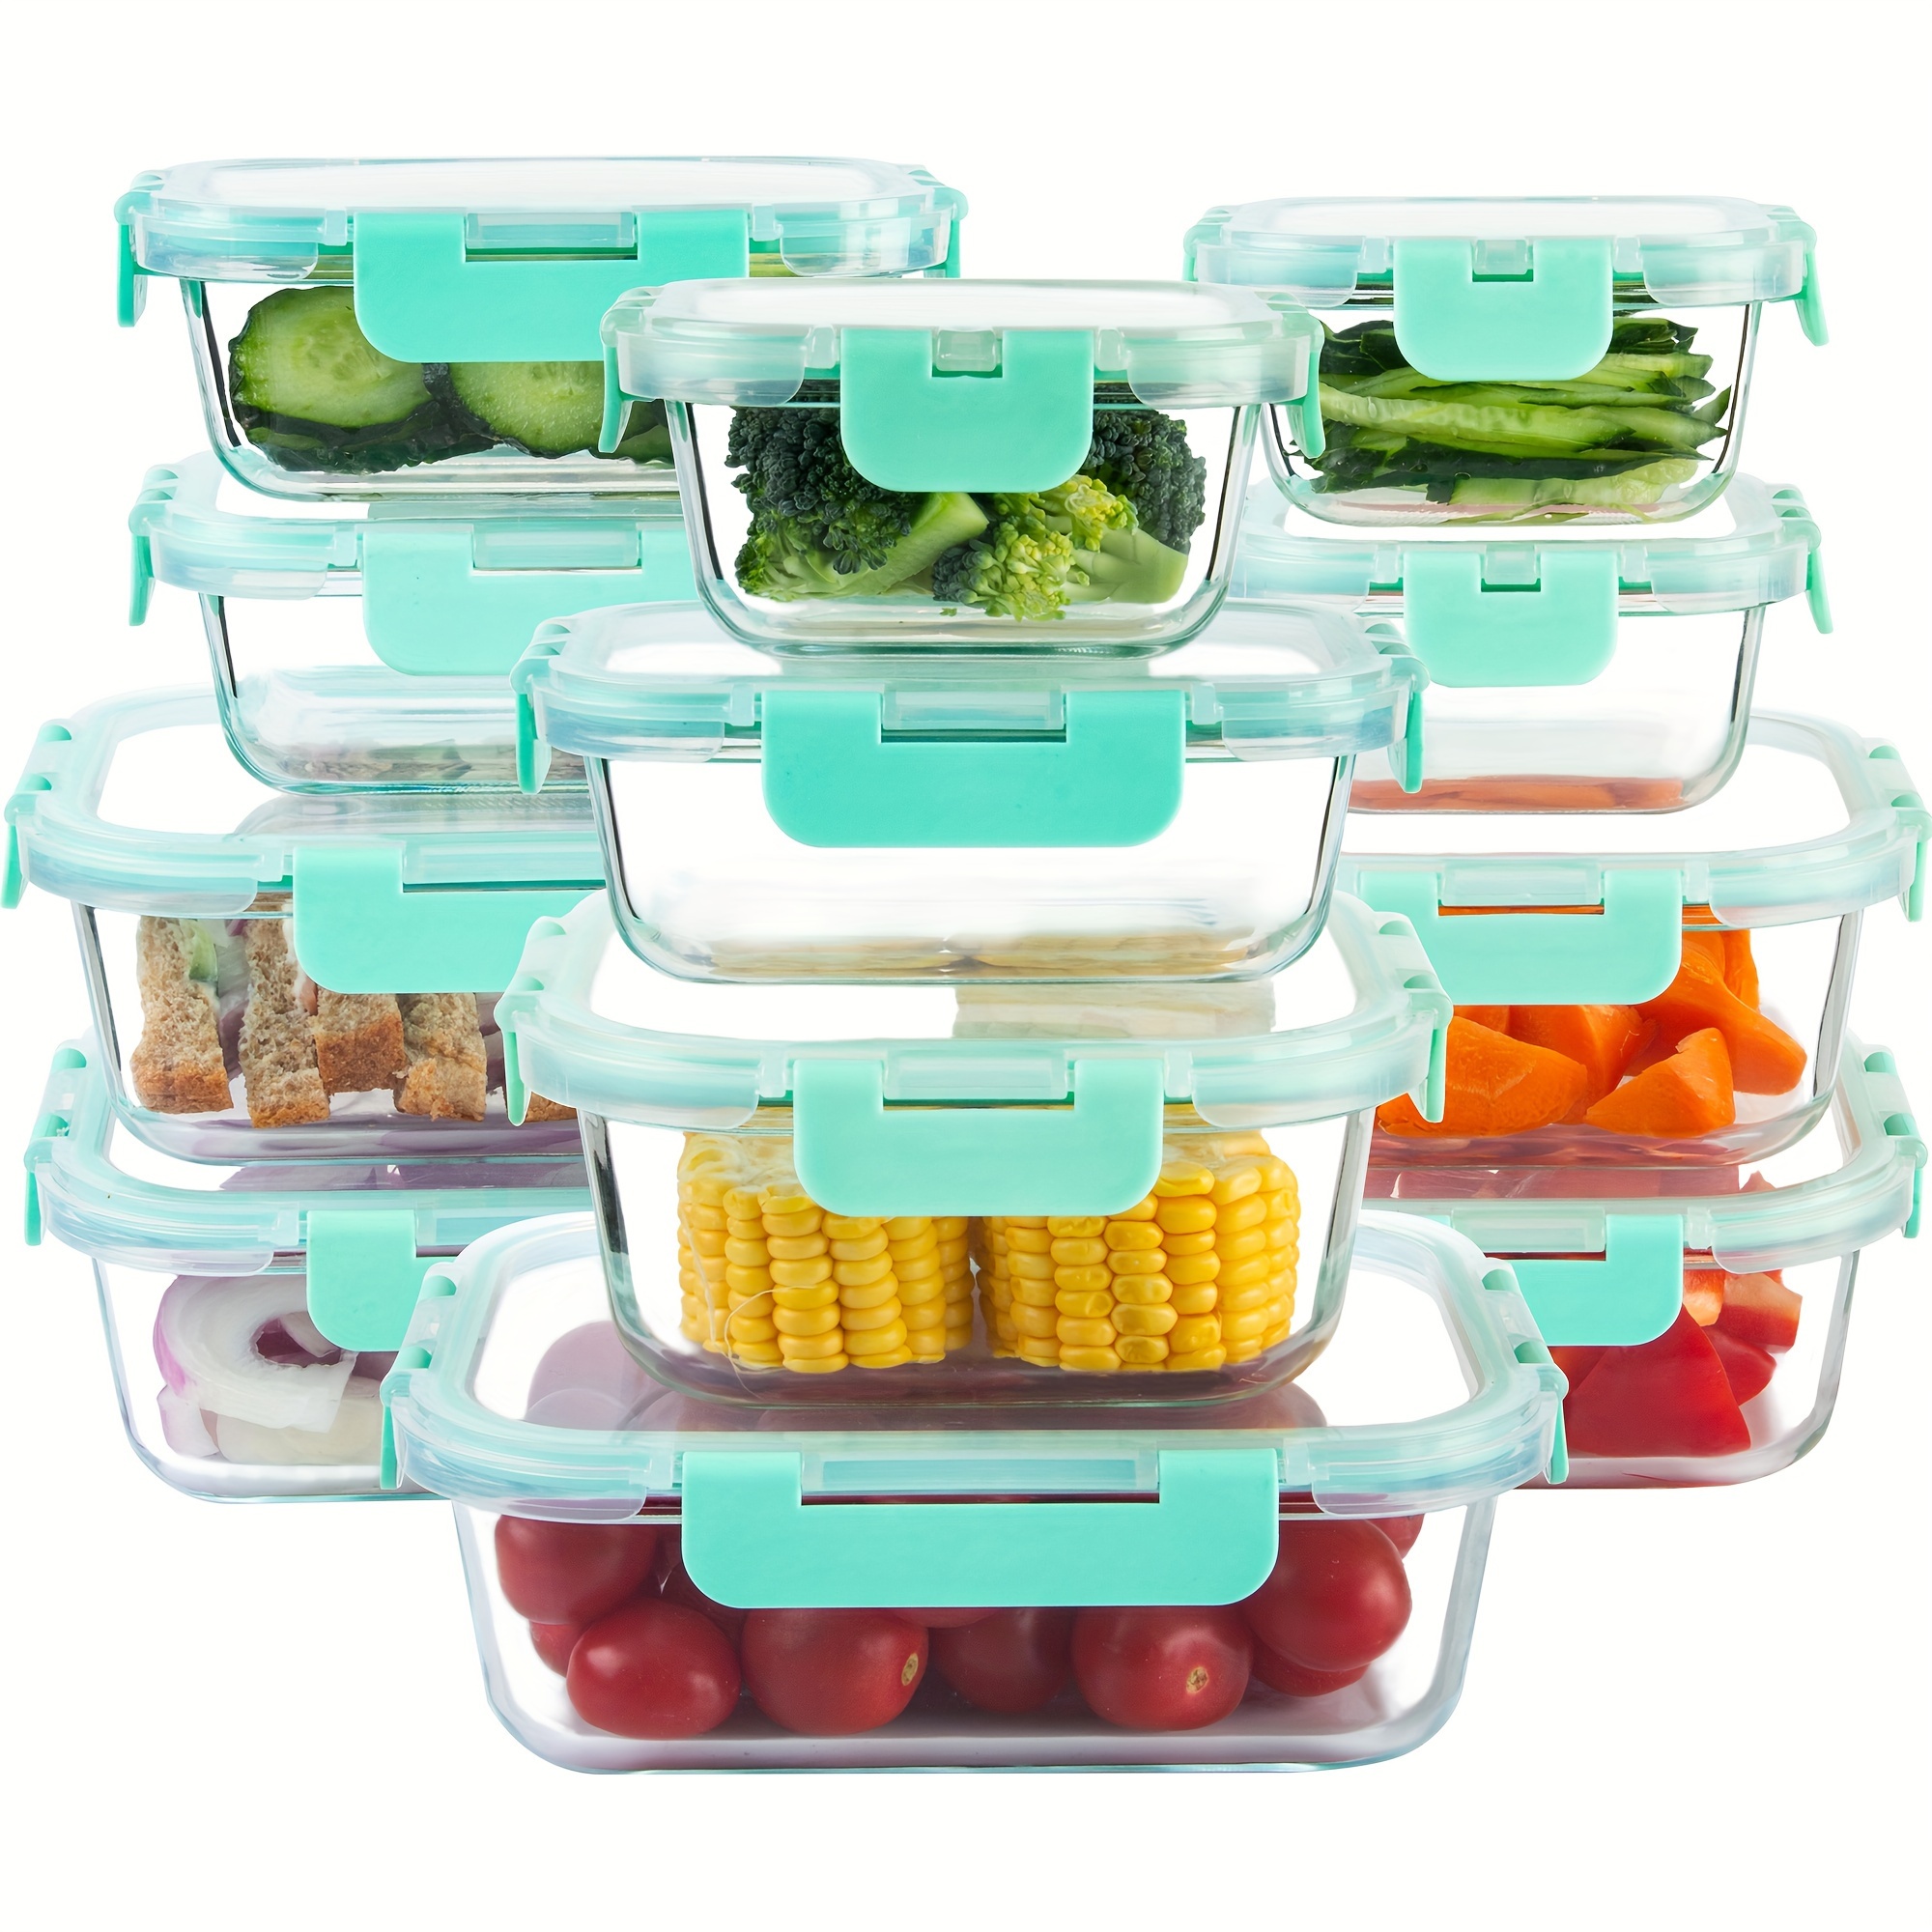 

12 Pack Glass Food Storage Containers, Glass Meal Prep Containers With Leakproof Lids, Airtight Glass Lunch Containers, Ideal For Food Storage, On-the-go, Leftover-mint Green (22oz & 6oz)